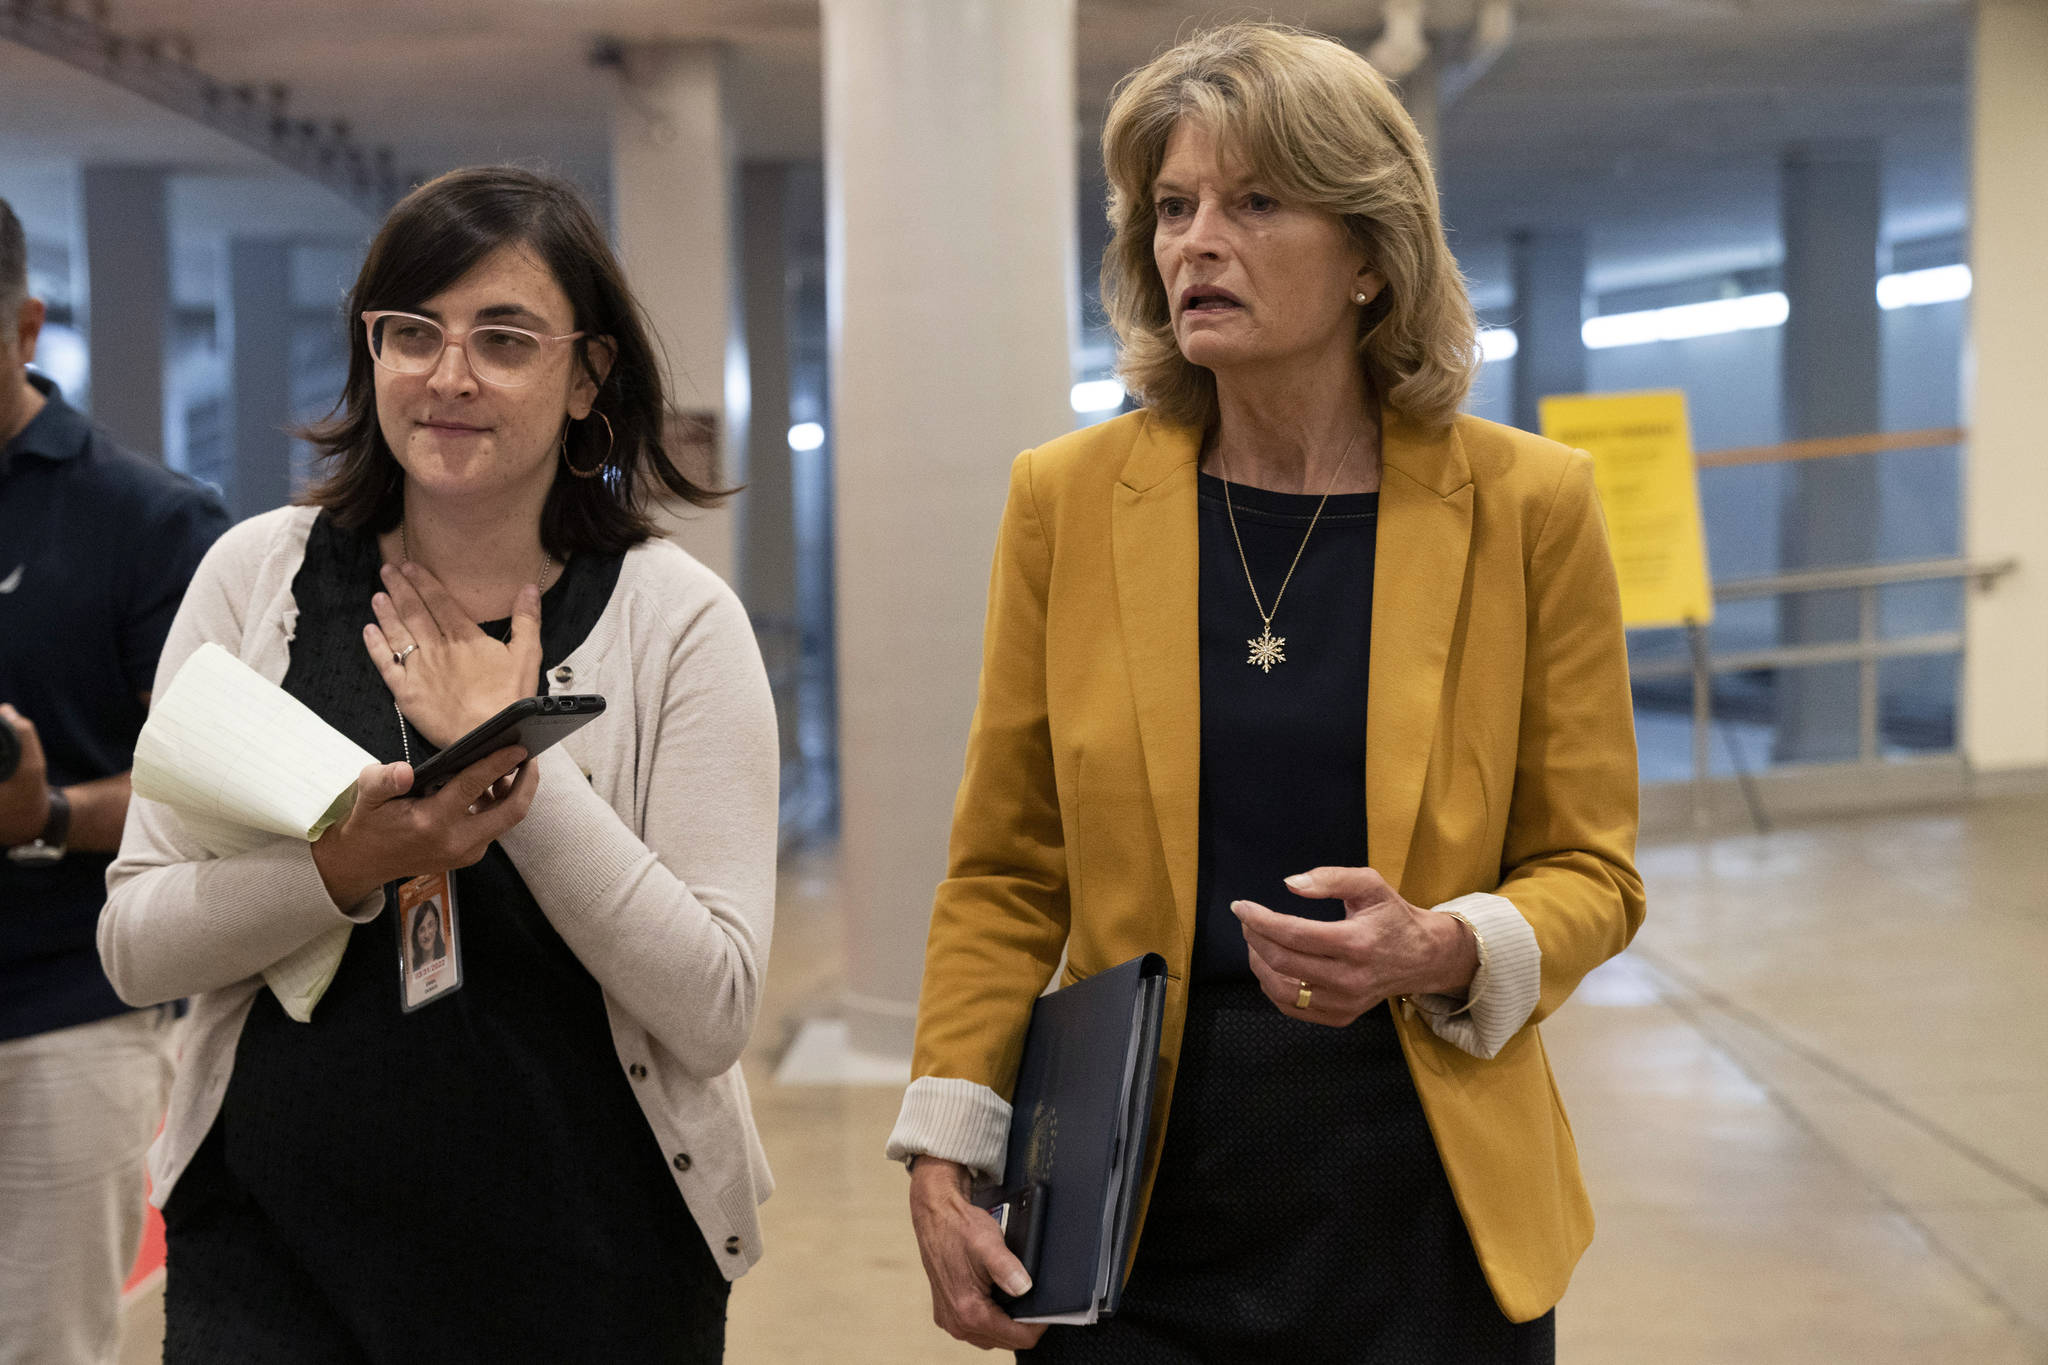 Sen. Lisa Murkowski, R-Alaska, right, speaks with a reporter while arriving for a Senate vote, Wednesday, June 16, 2021, on Capitol Hill in Washington. (AP Photo/Jacquelyn Martin)